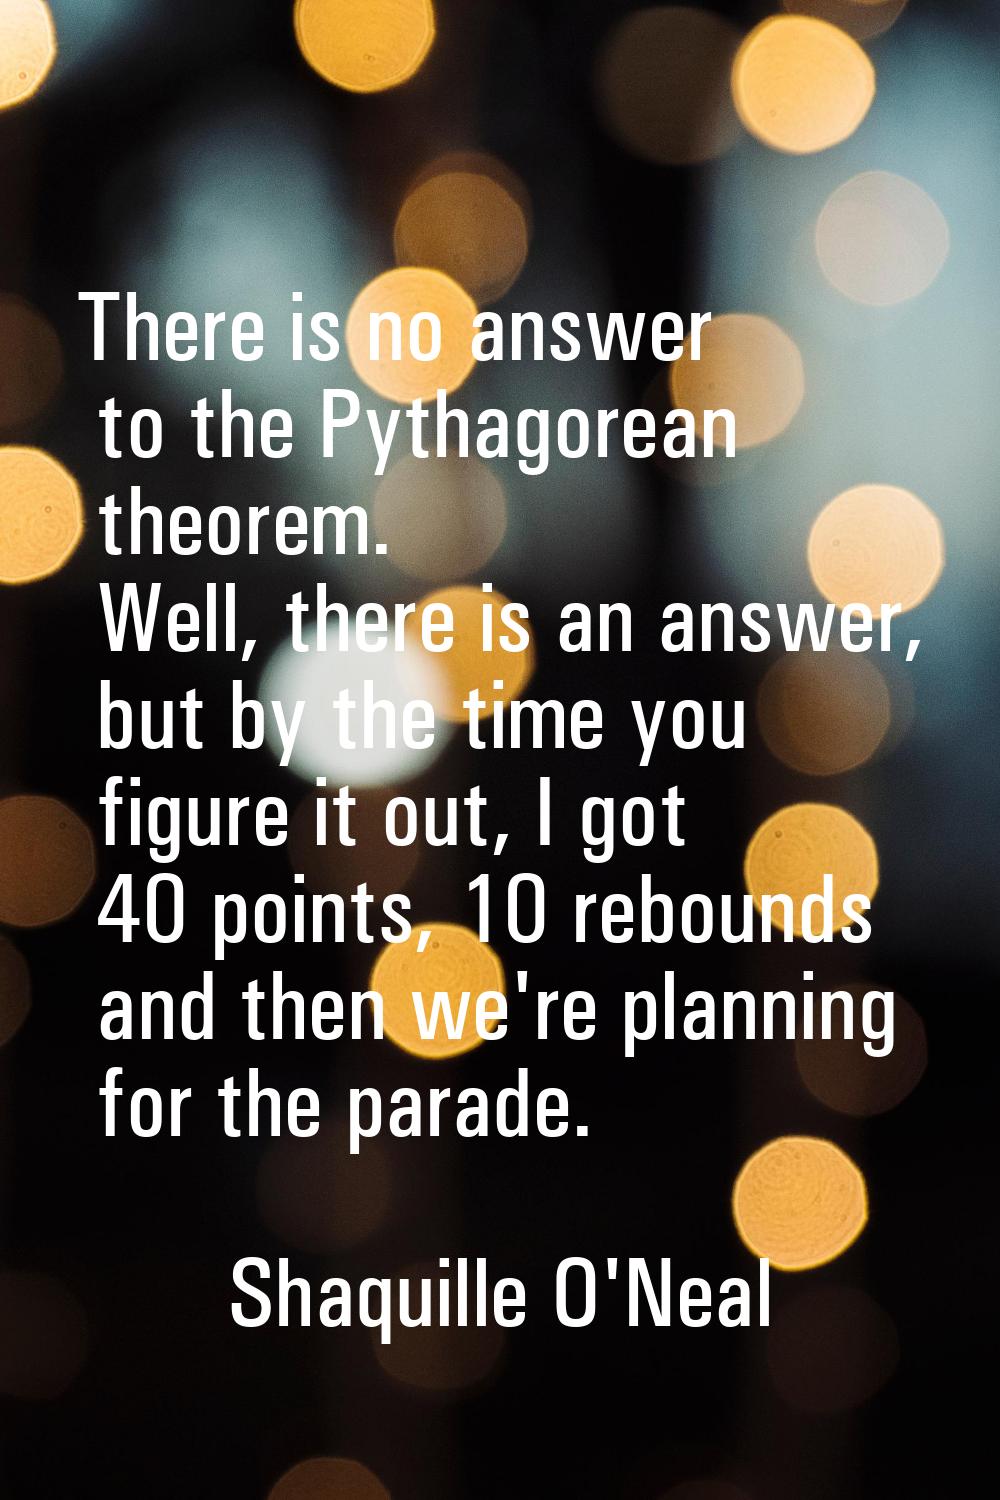 There is no answer to the Pythagorean theorem. Well, there is an answer, but by the time you figure